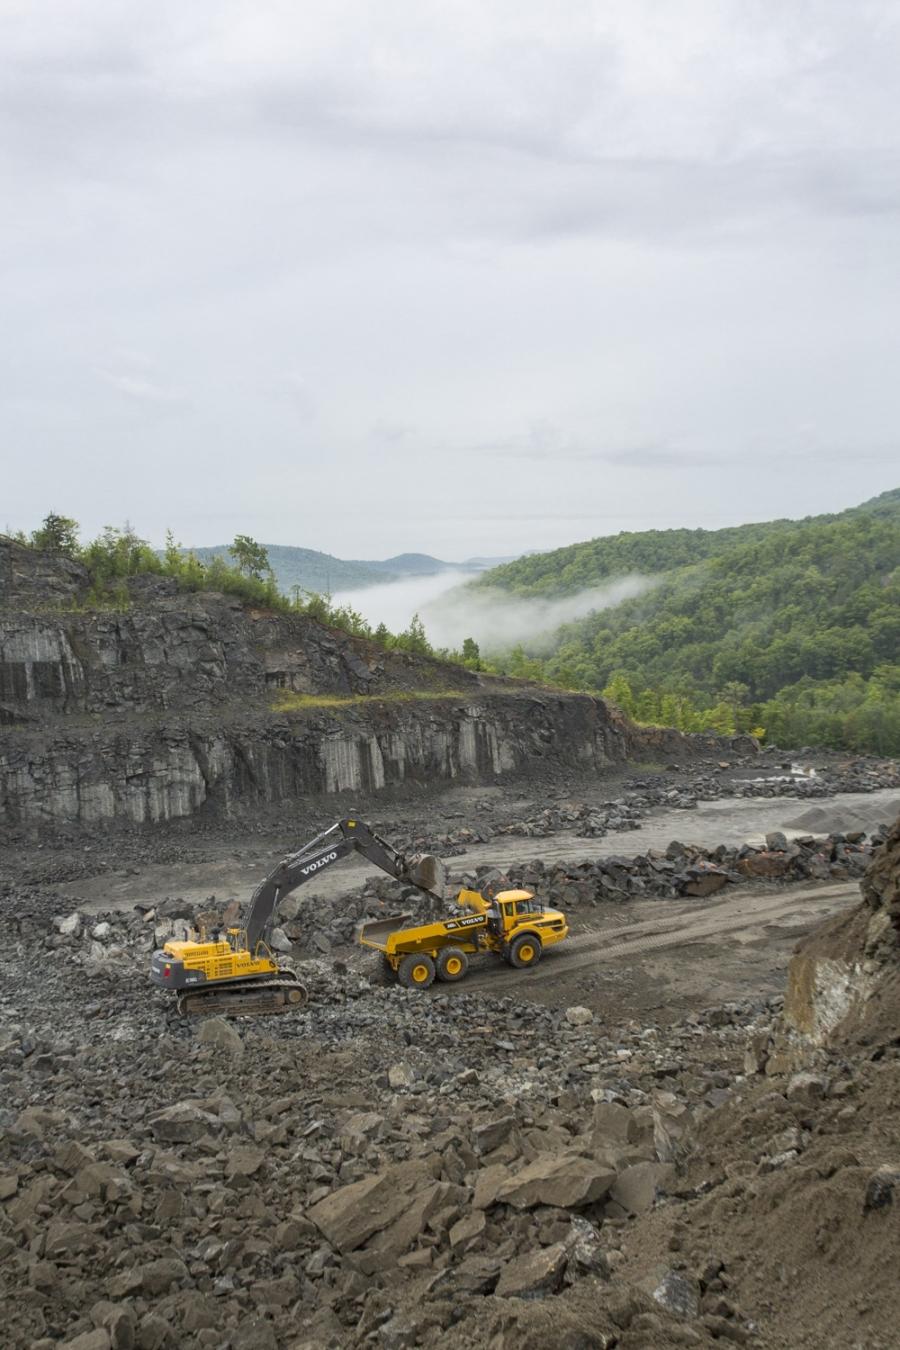 A Volvo excavator and articulated hauler work together on the Barton mine.